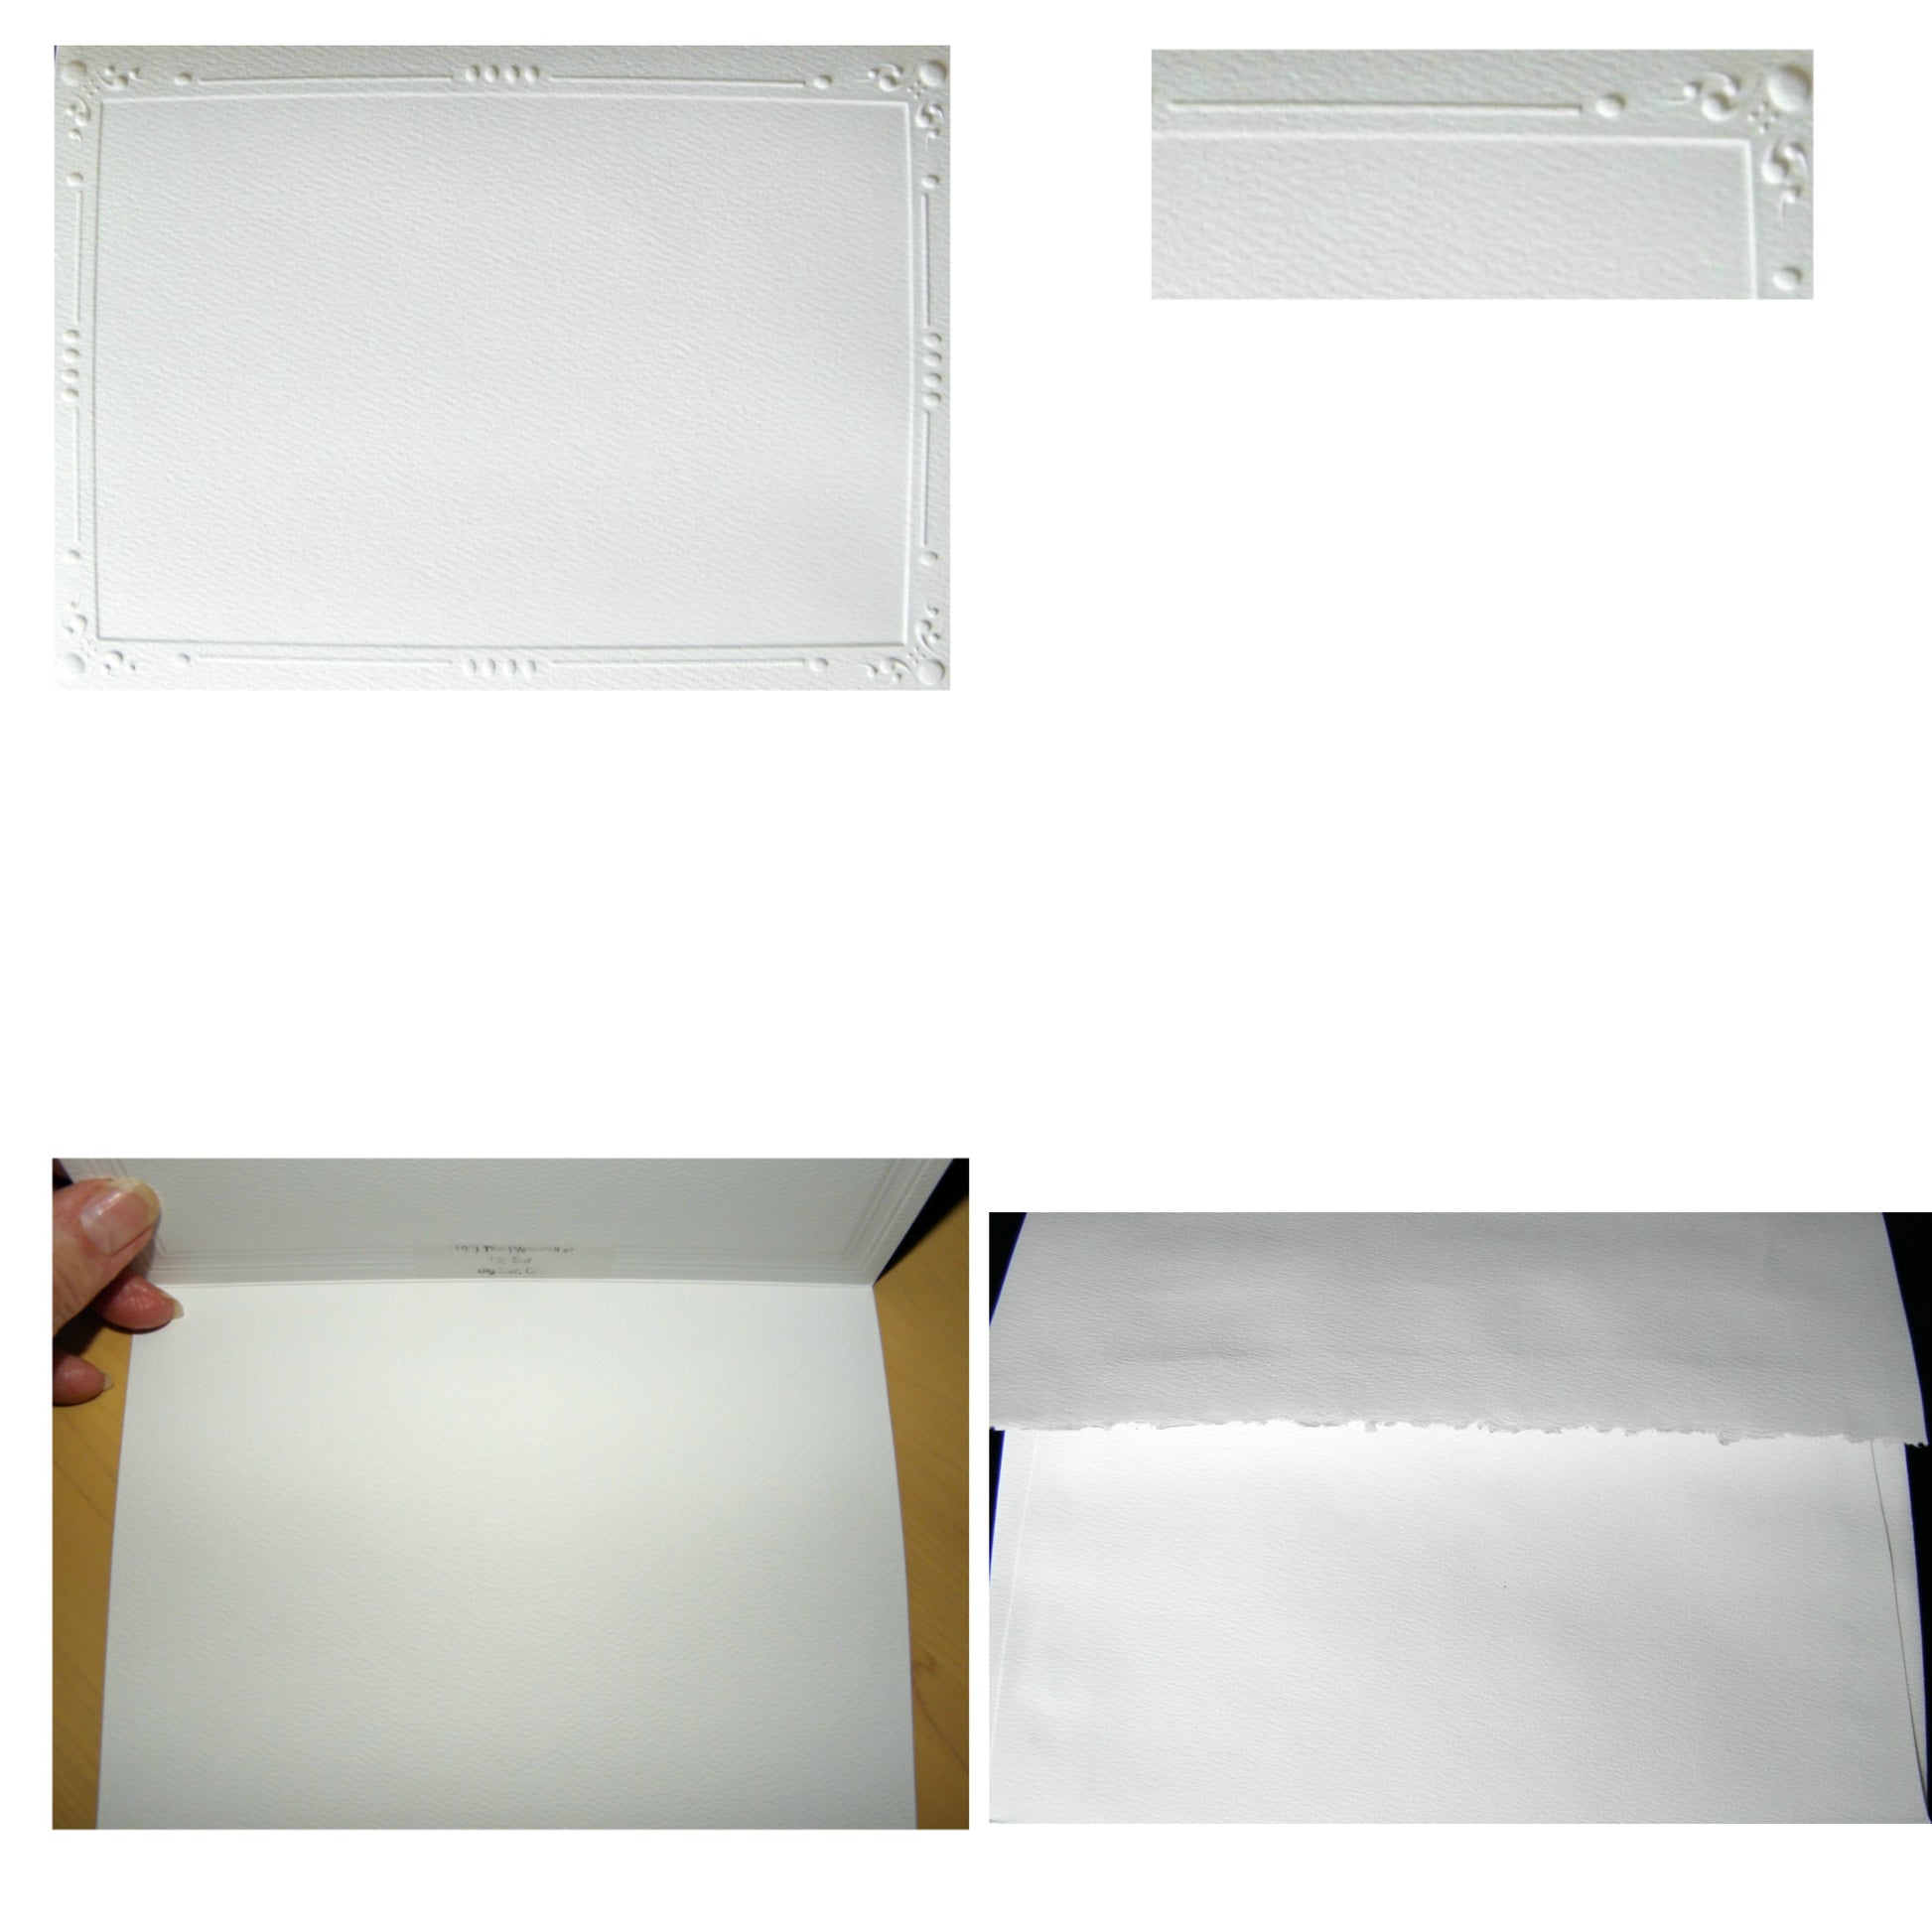 Photo of the Decorative Card Stock and coordinating Decorative Envelope